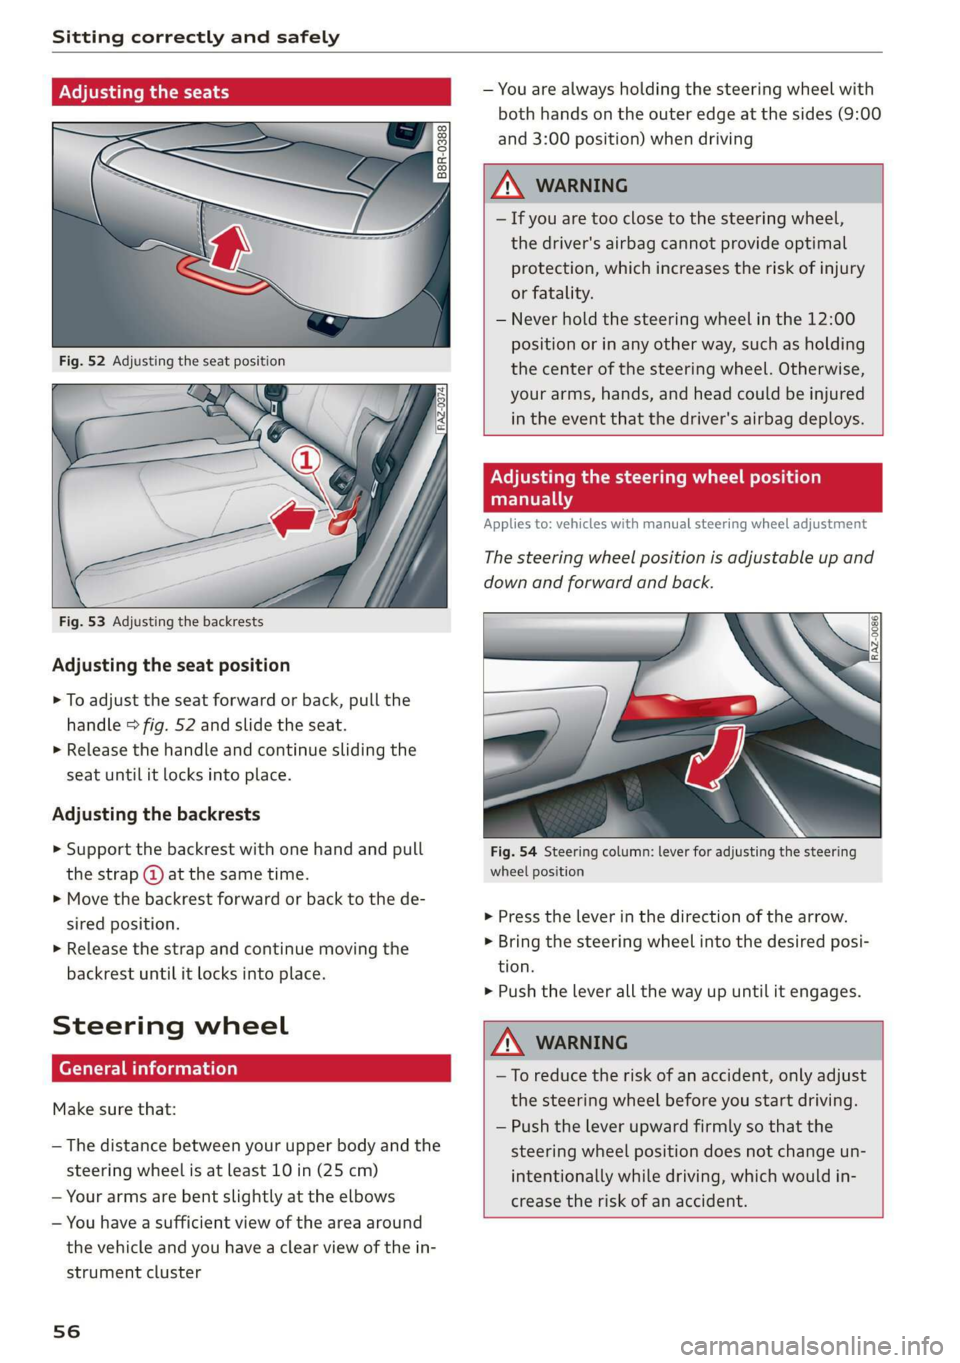 AUDI Q3 2019  Owners Manual Sitting correctly and safely 
  
jjusting the seats 
  
Fig. 53 Adjusting the backrests 
Adjusting the seat position 
> To adjust the seat forward or back, pull the 
handle > fig. 52 and slide the sea